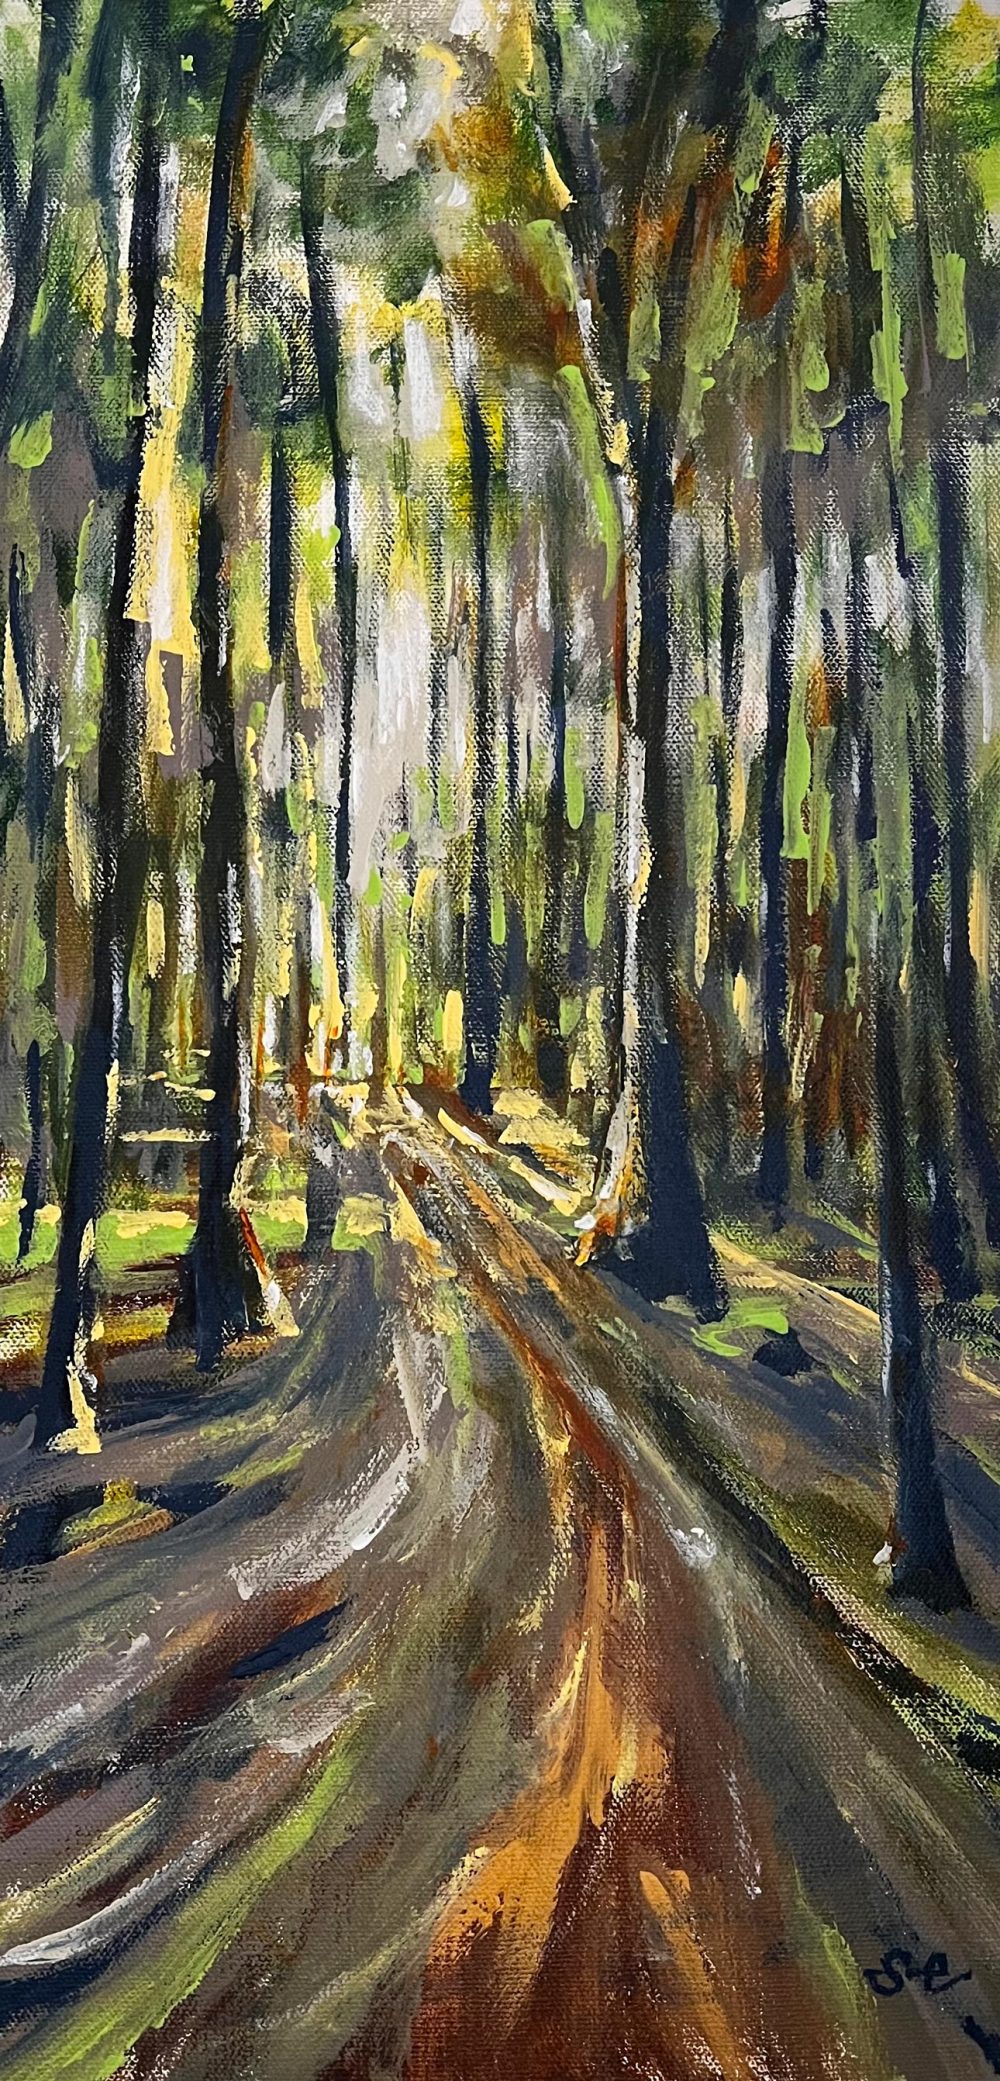 Landscape painting titled Becoming by Samantha Eio depicting golden light at the end of a forest trail.